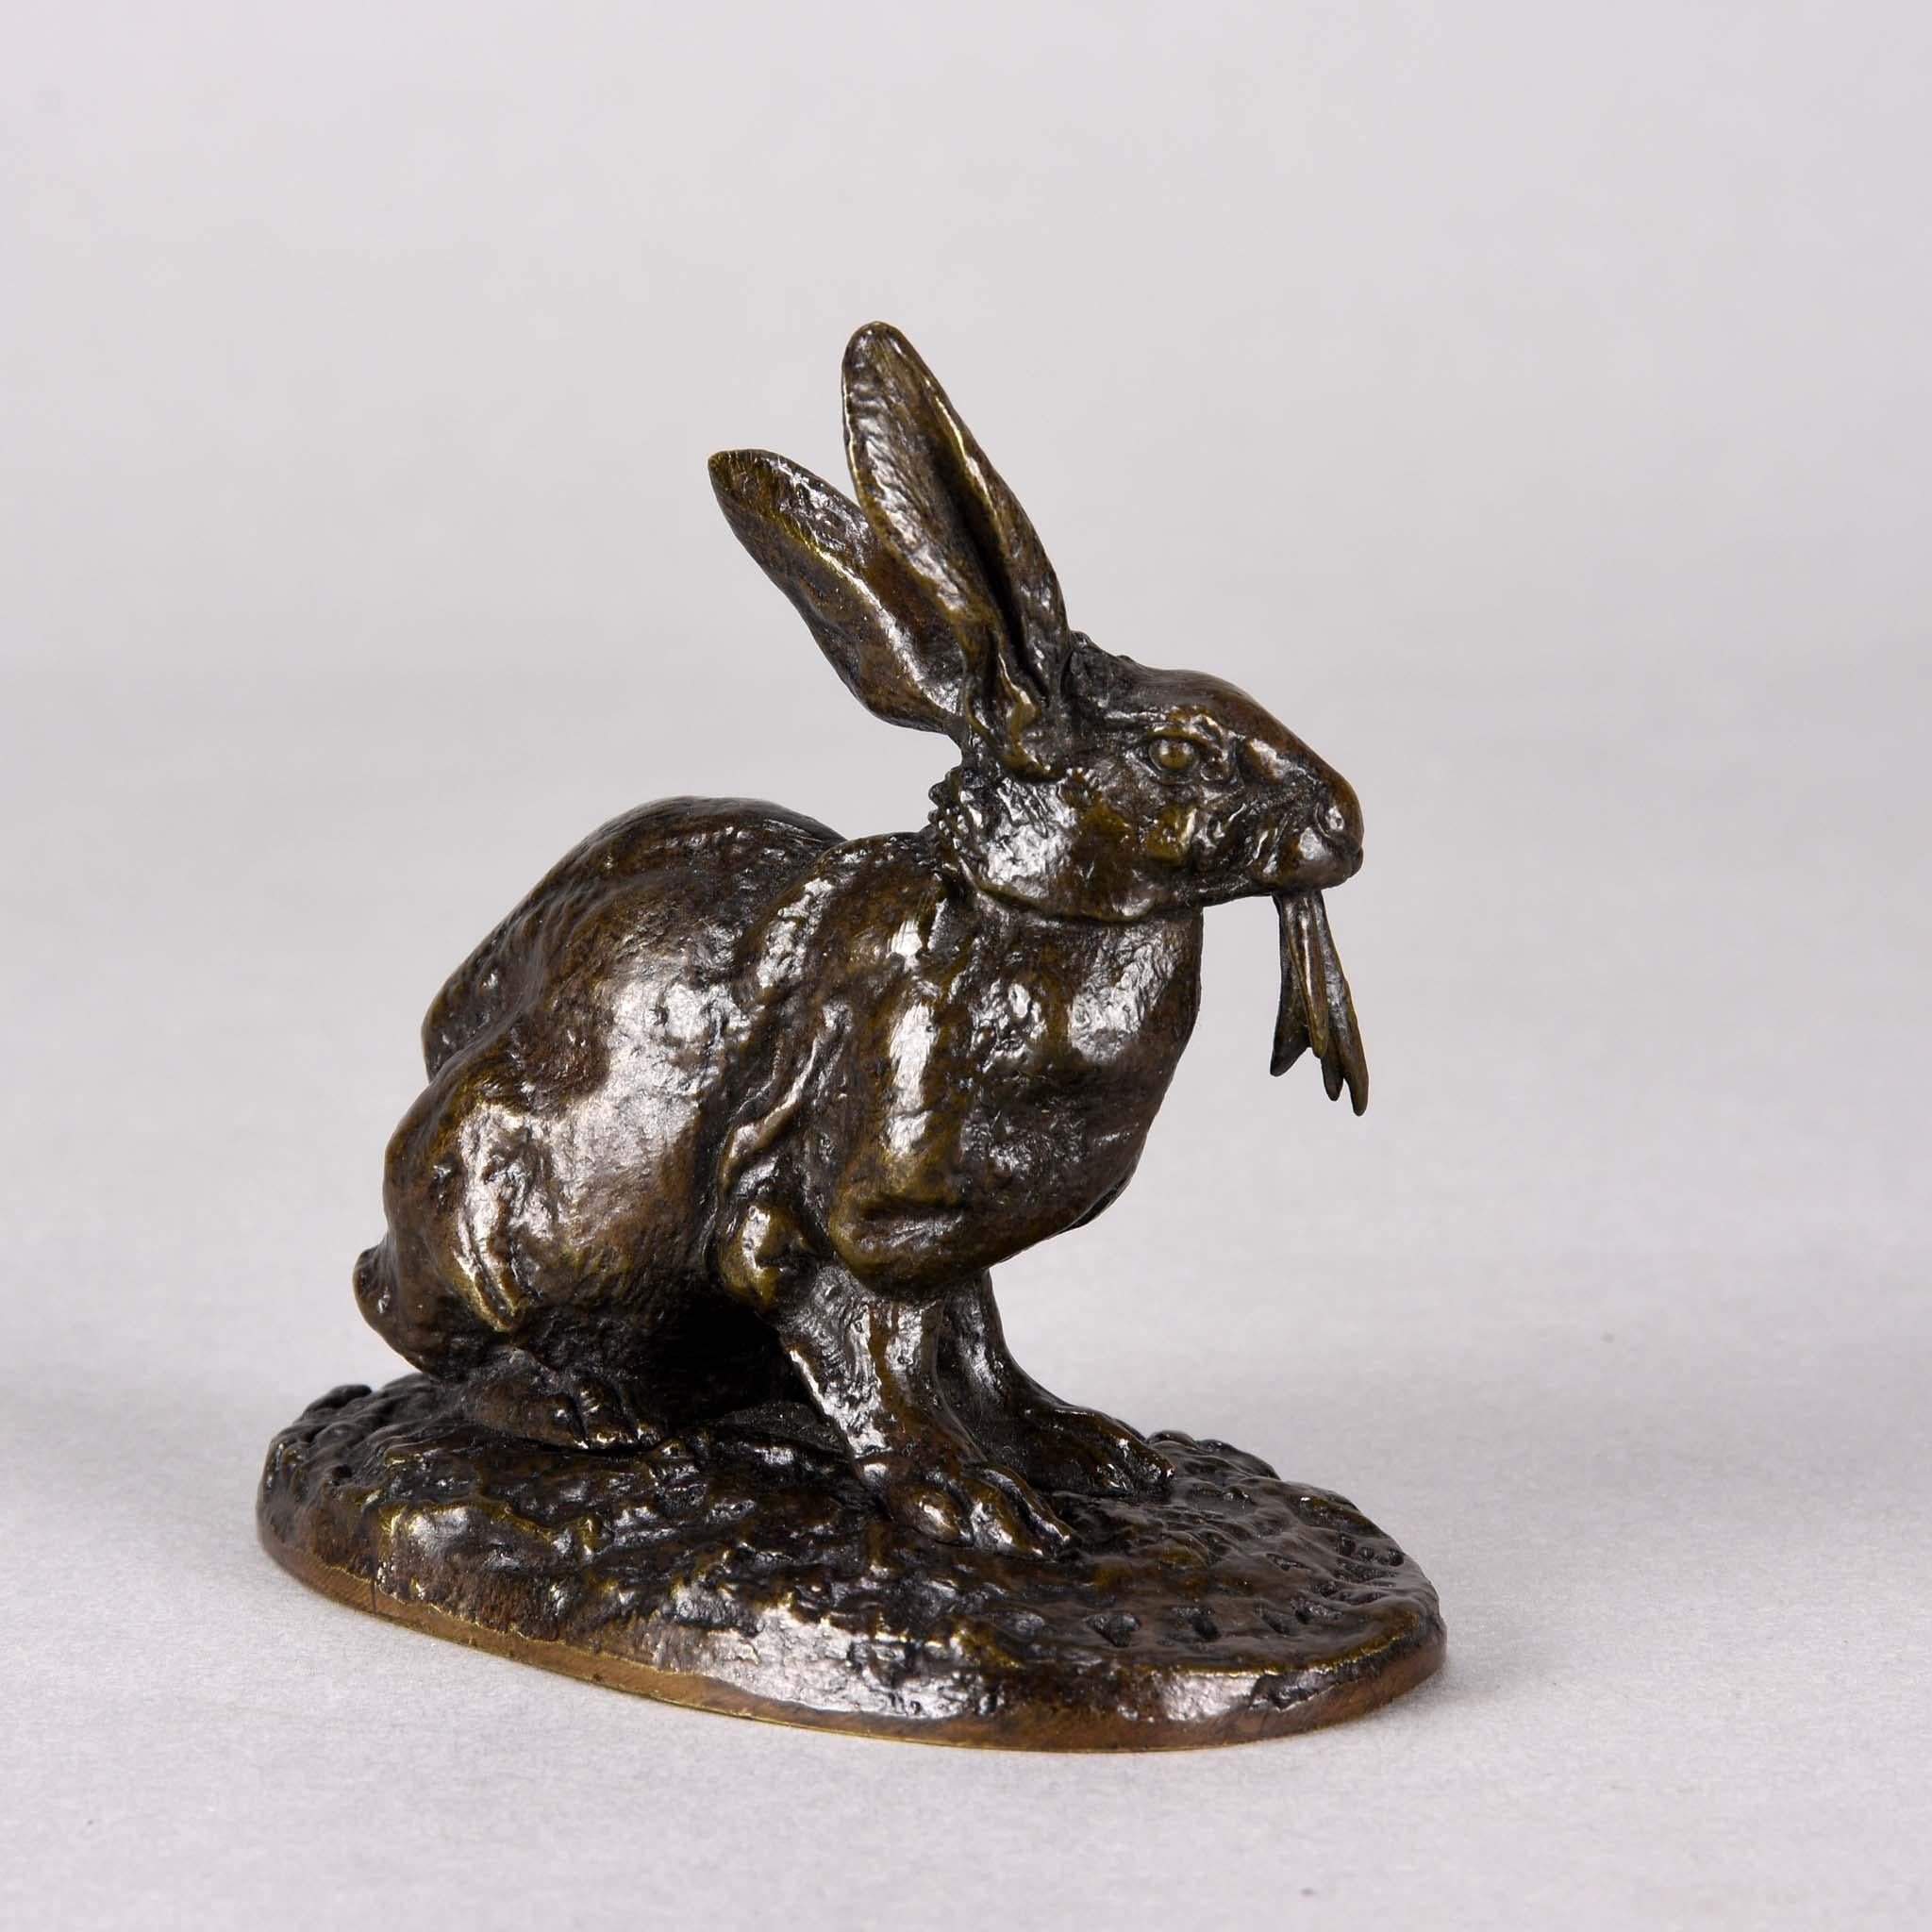 Wonderful French animalier bronze study of a seated rabbit with excellent detail and wonderful rich variegated black, brown and golden patina. Signed P J Mêne.

An exceptionally fine early example of one of the artist's most popular subjects from